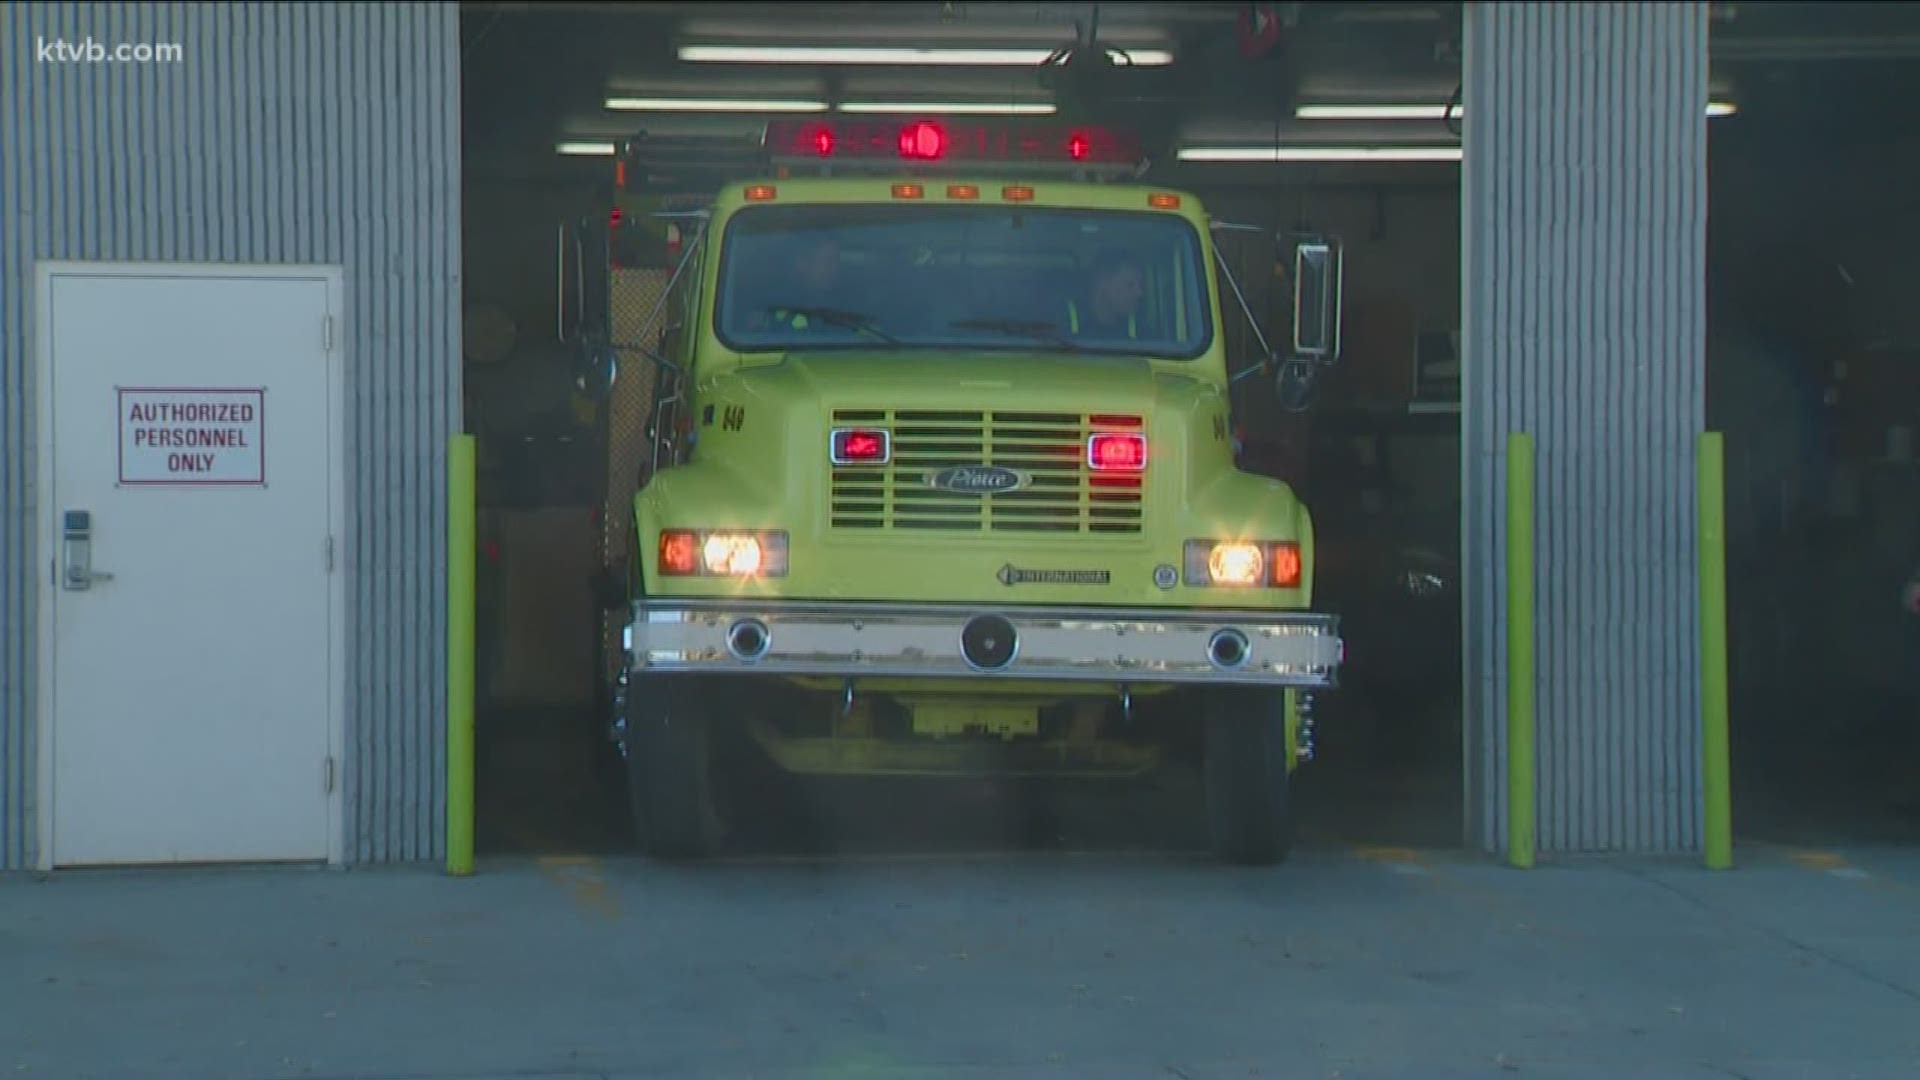 The Gem County Fire District is asking voters to approve a $5 million bond to fund a new fire station.